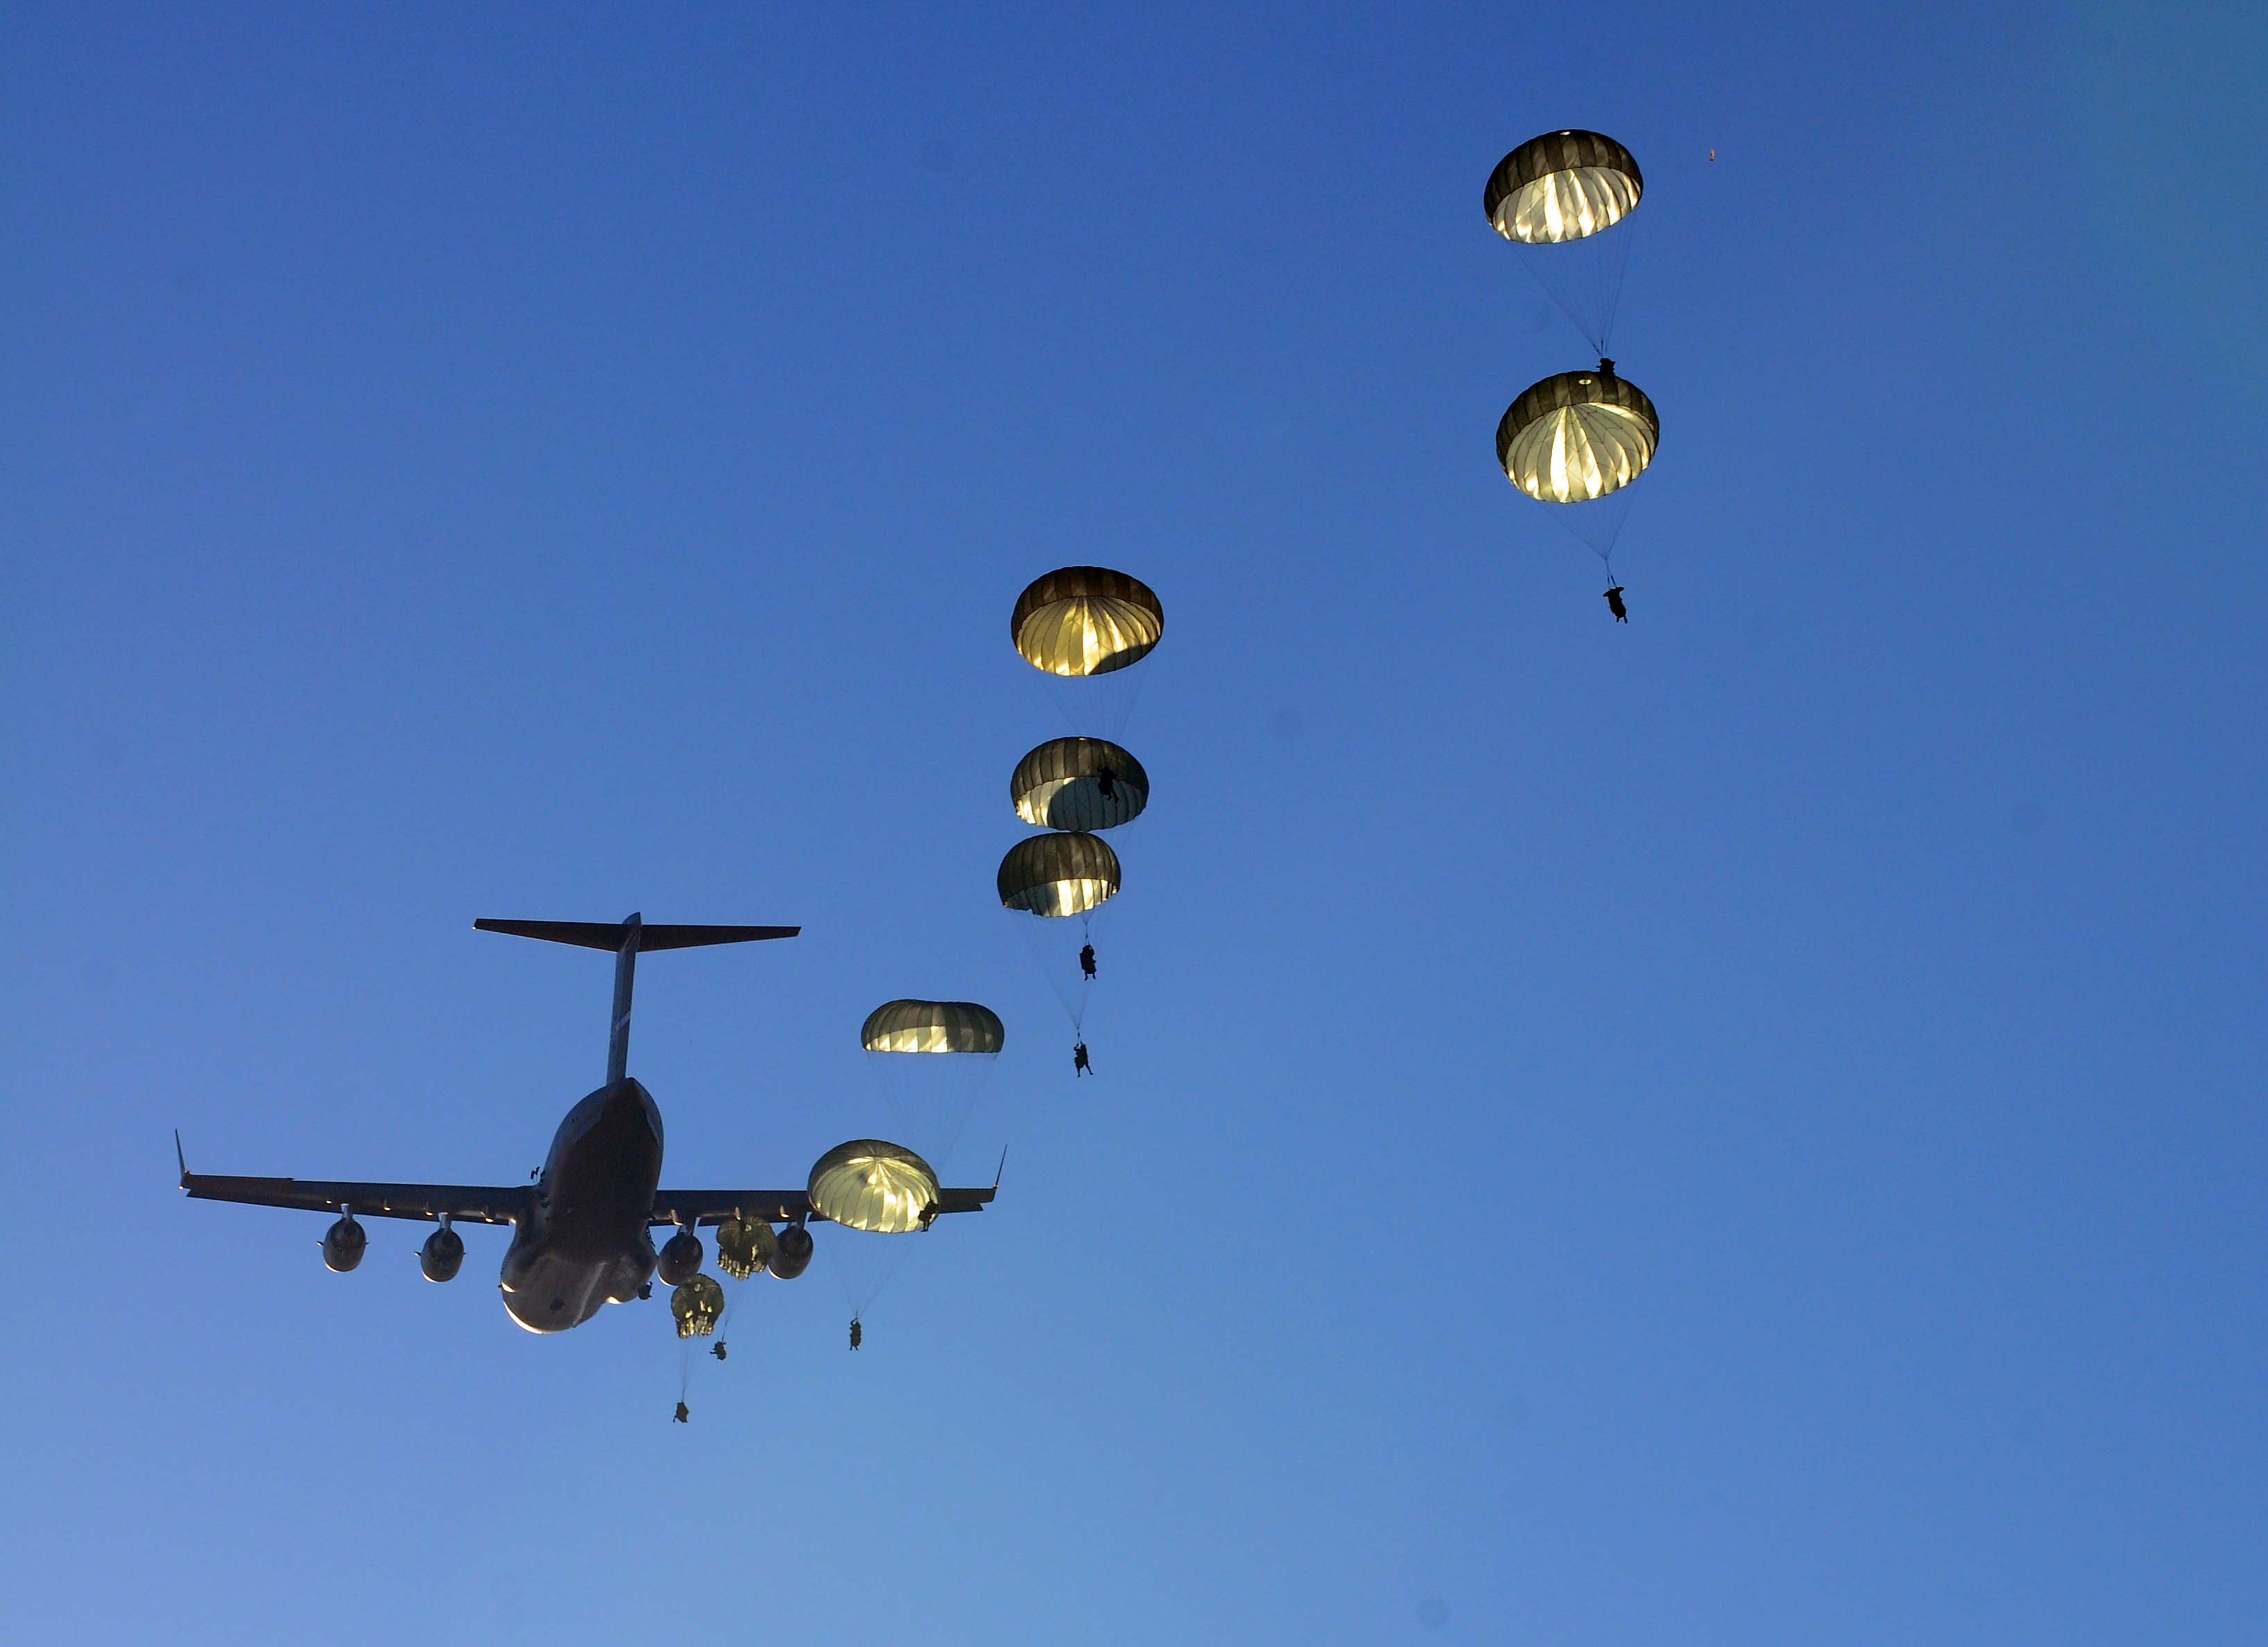 Army Airborne Pictures Pin Us Army Airborne Rangers Special Forces on Pinterest